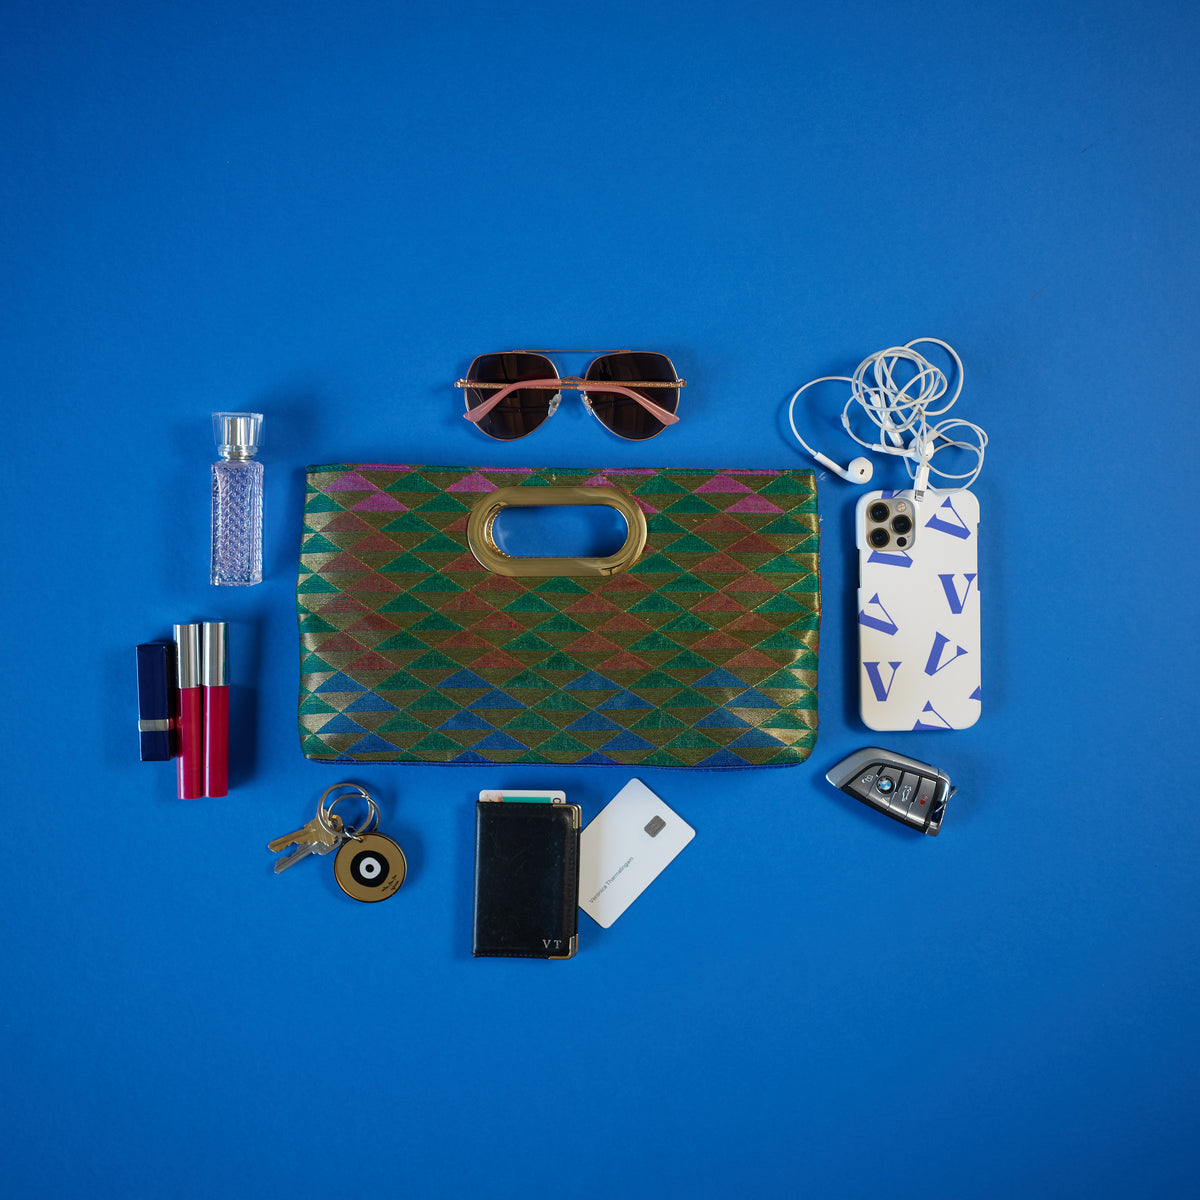 Everything that can fit into the Gaja Multi color mini tote with gold handle. Rani Collection as seen at NYFW 2021 Flying solo by Veronica Tharmalingam. Sunglasses, phone, headphones, perfume, lipstick and gloss,cards, keys and more